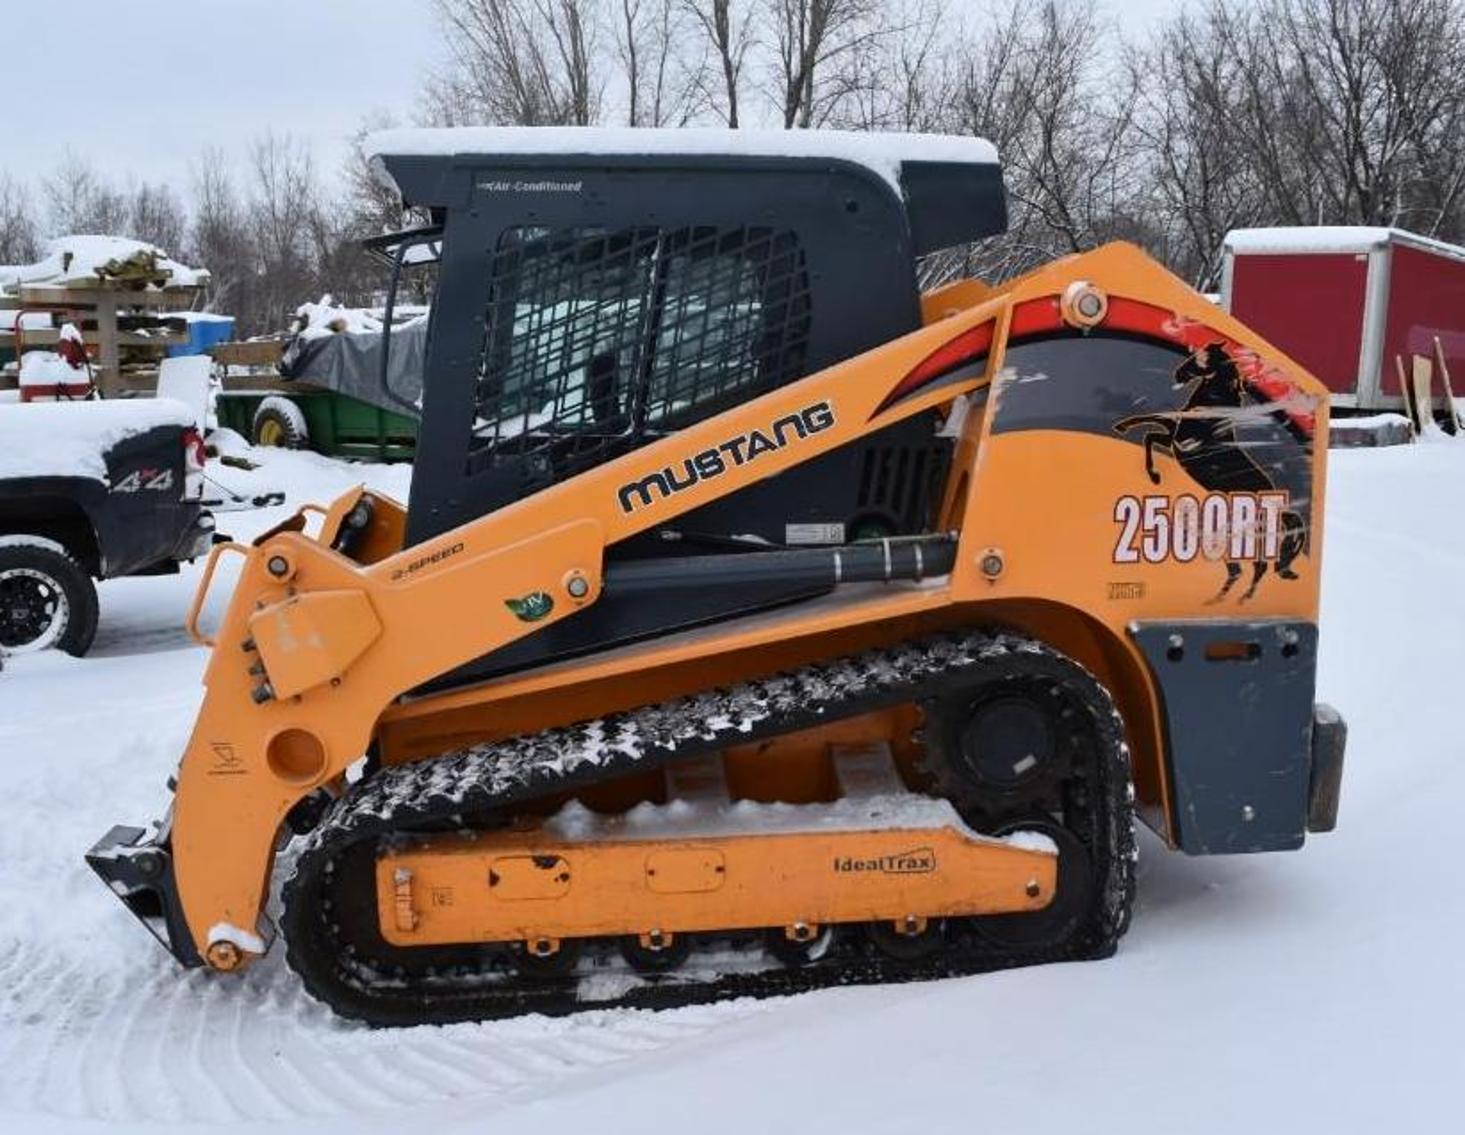 2016 Mustang 2500RT NXT3 Track Skid Loader